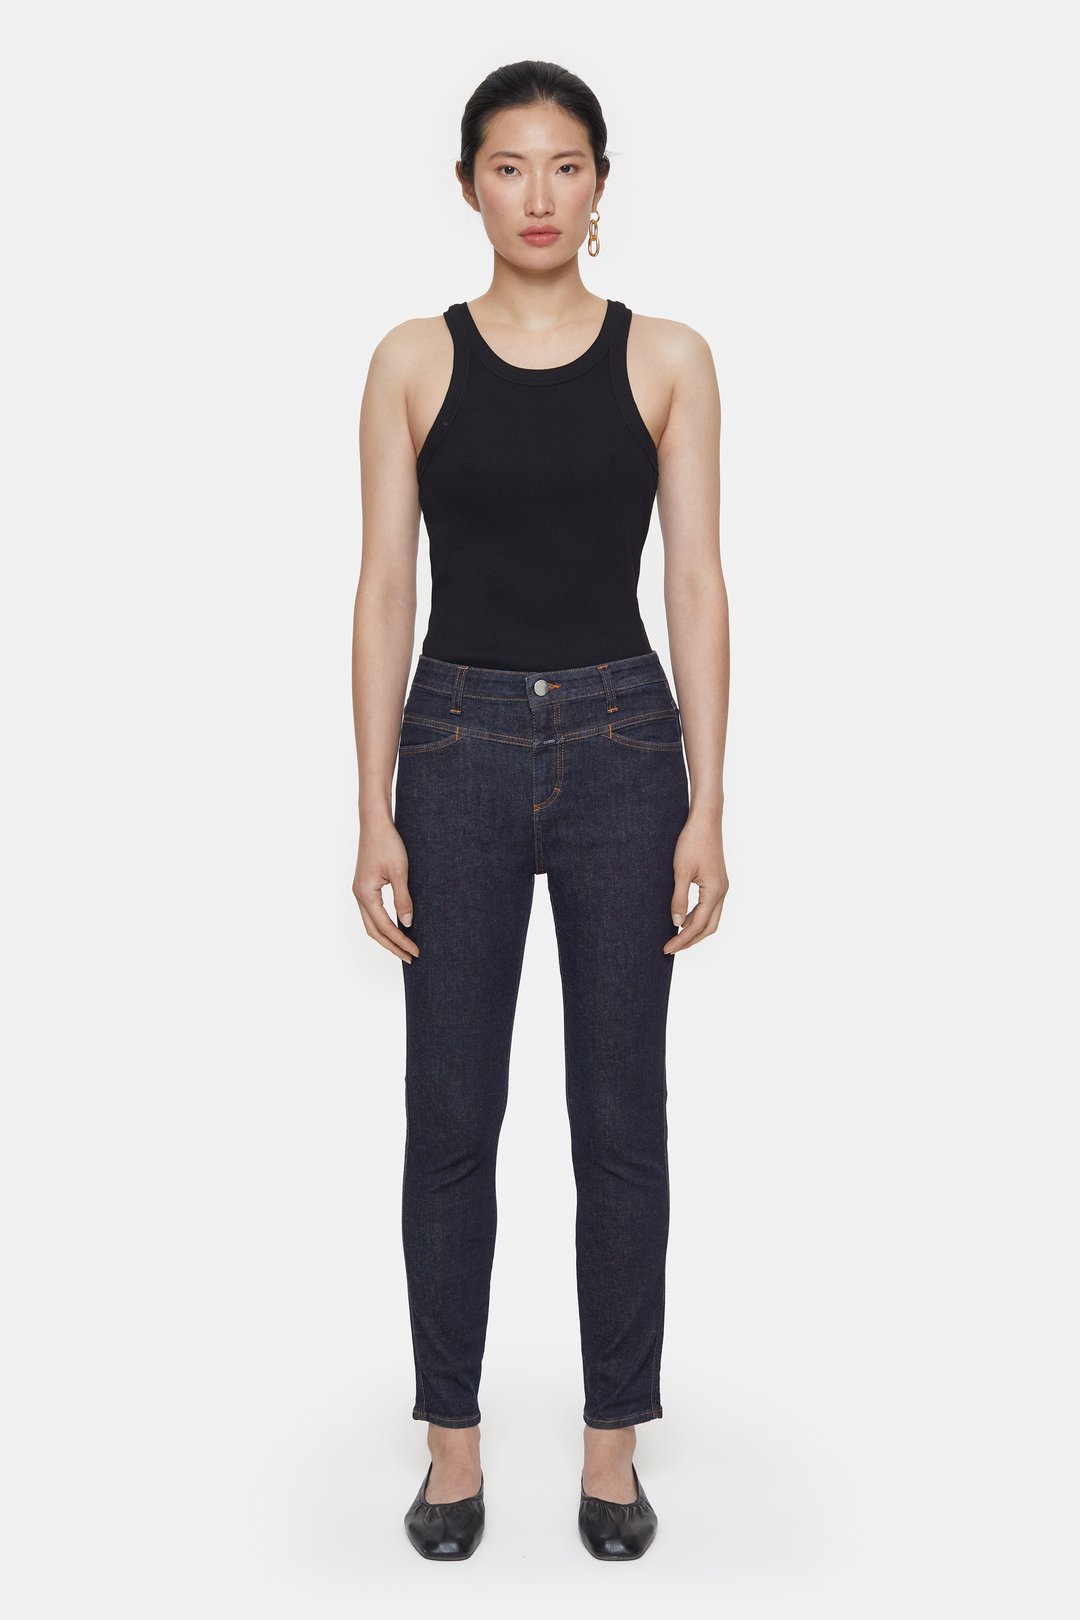 SKINNY JEANS - NAME STYLE PUSHER SKINNY CLOSED 